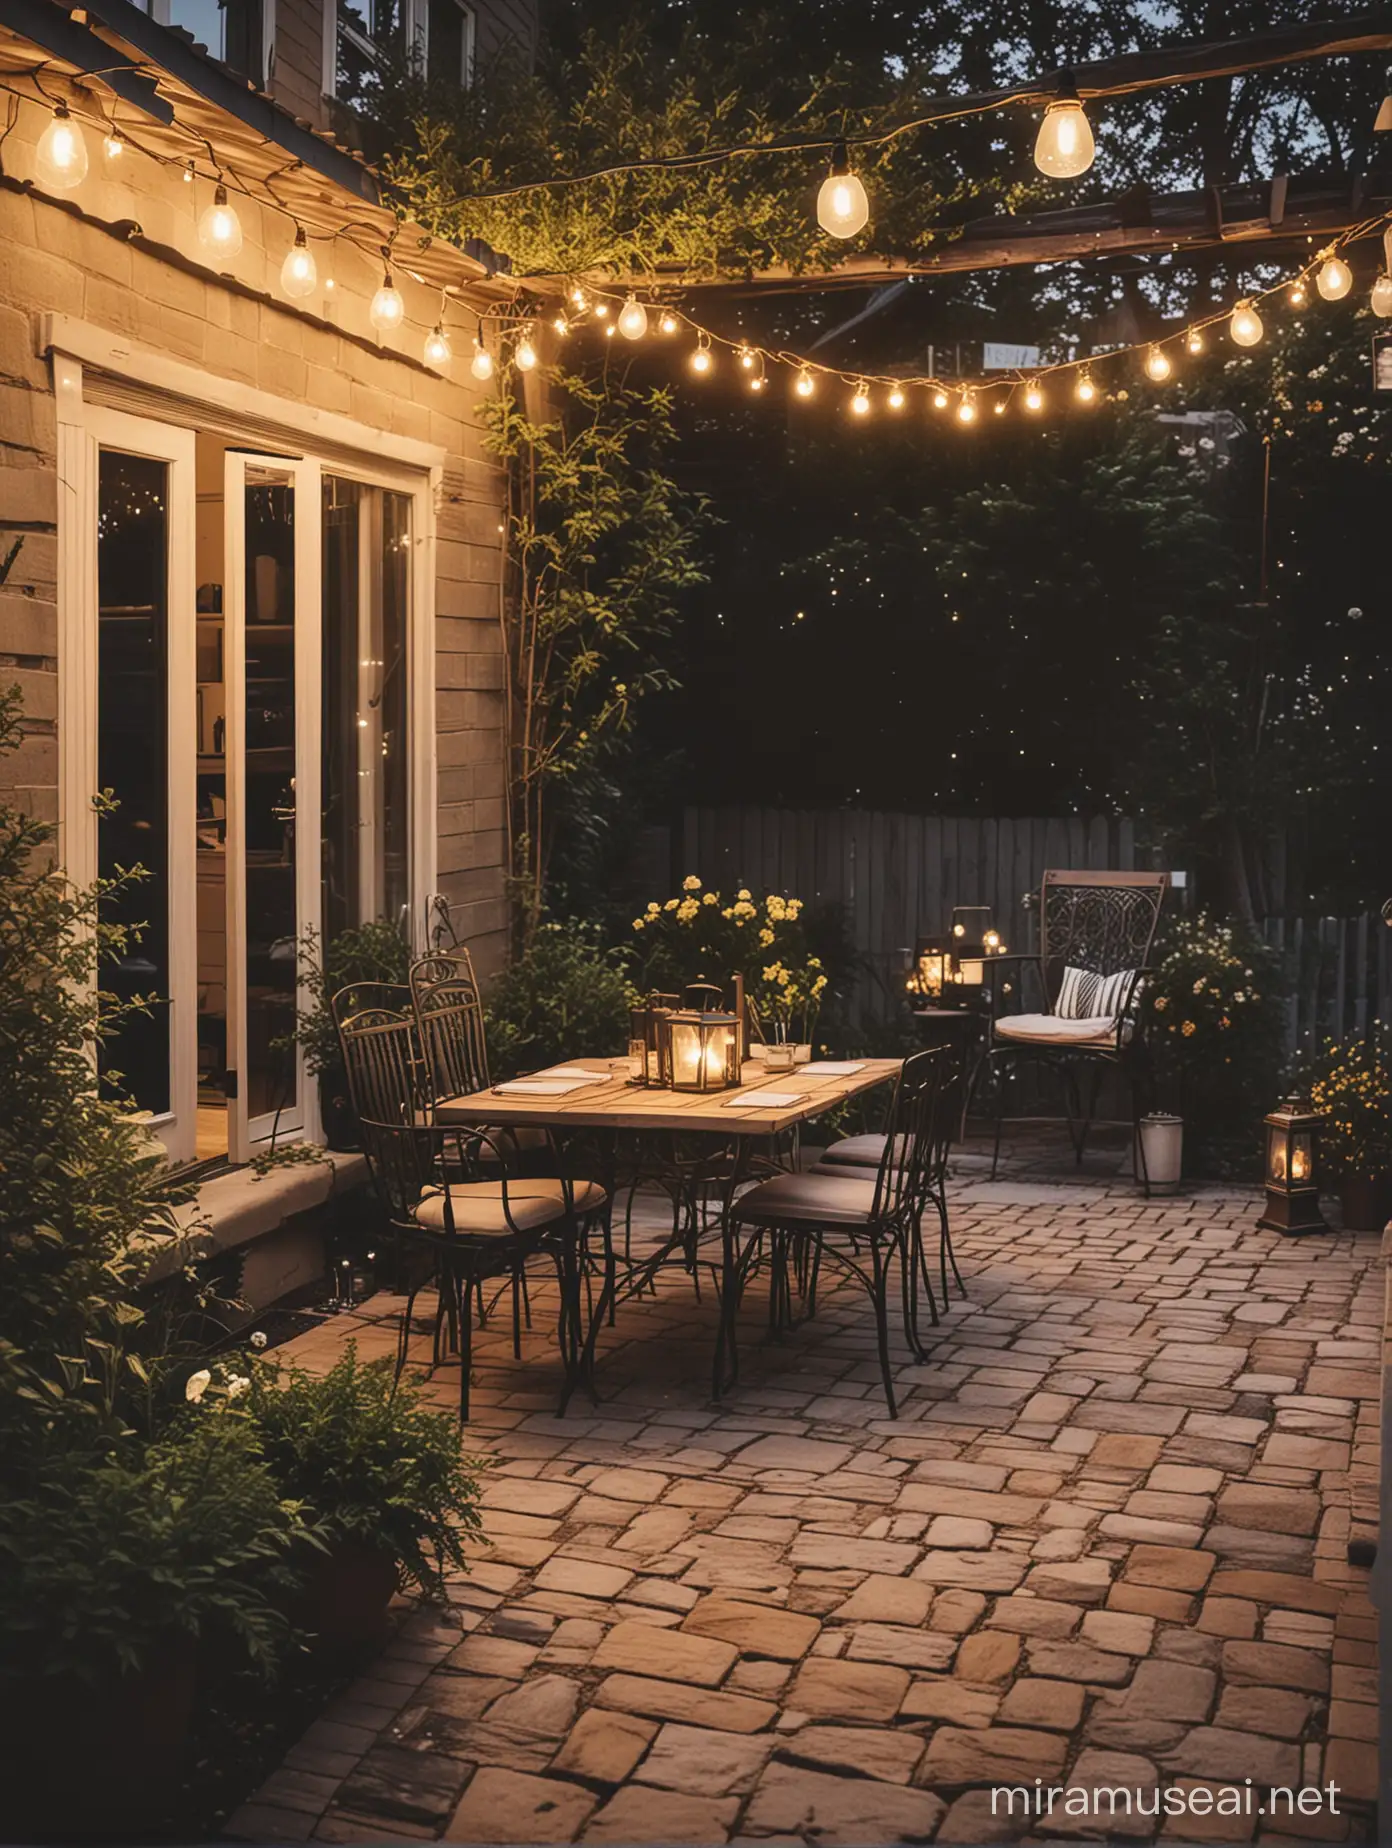 Cozy Outdoor Patio with Warm Lantern Lighting and Fireflies